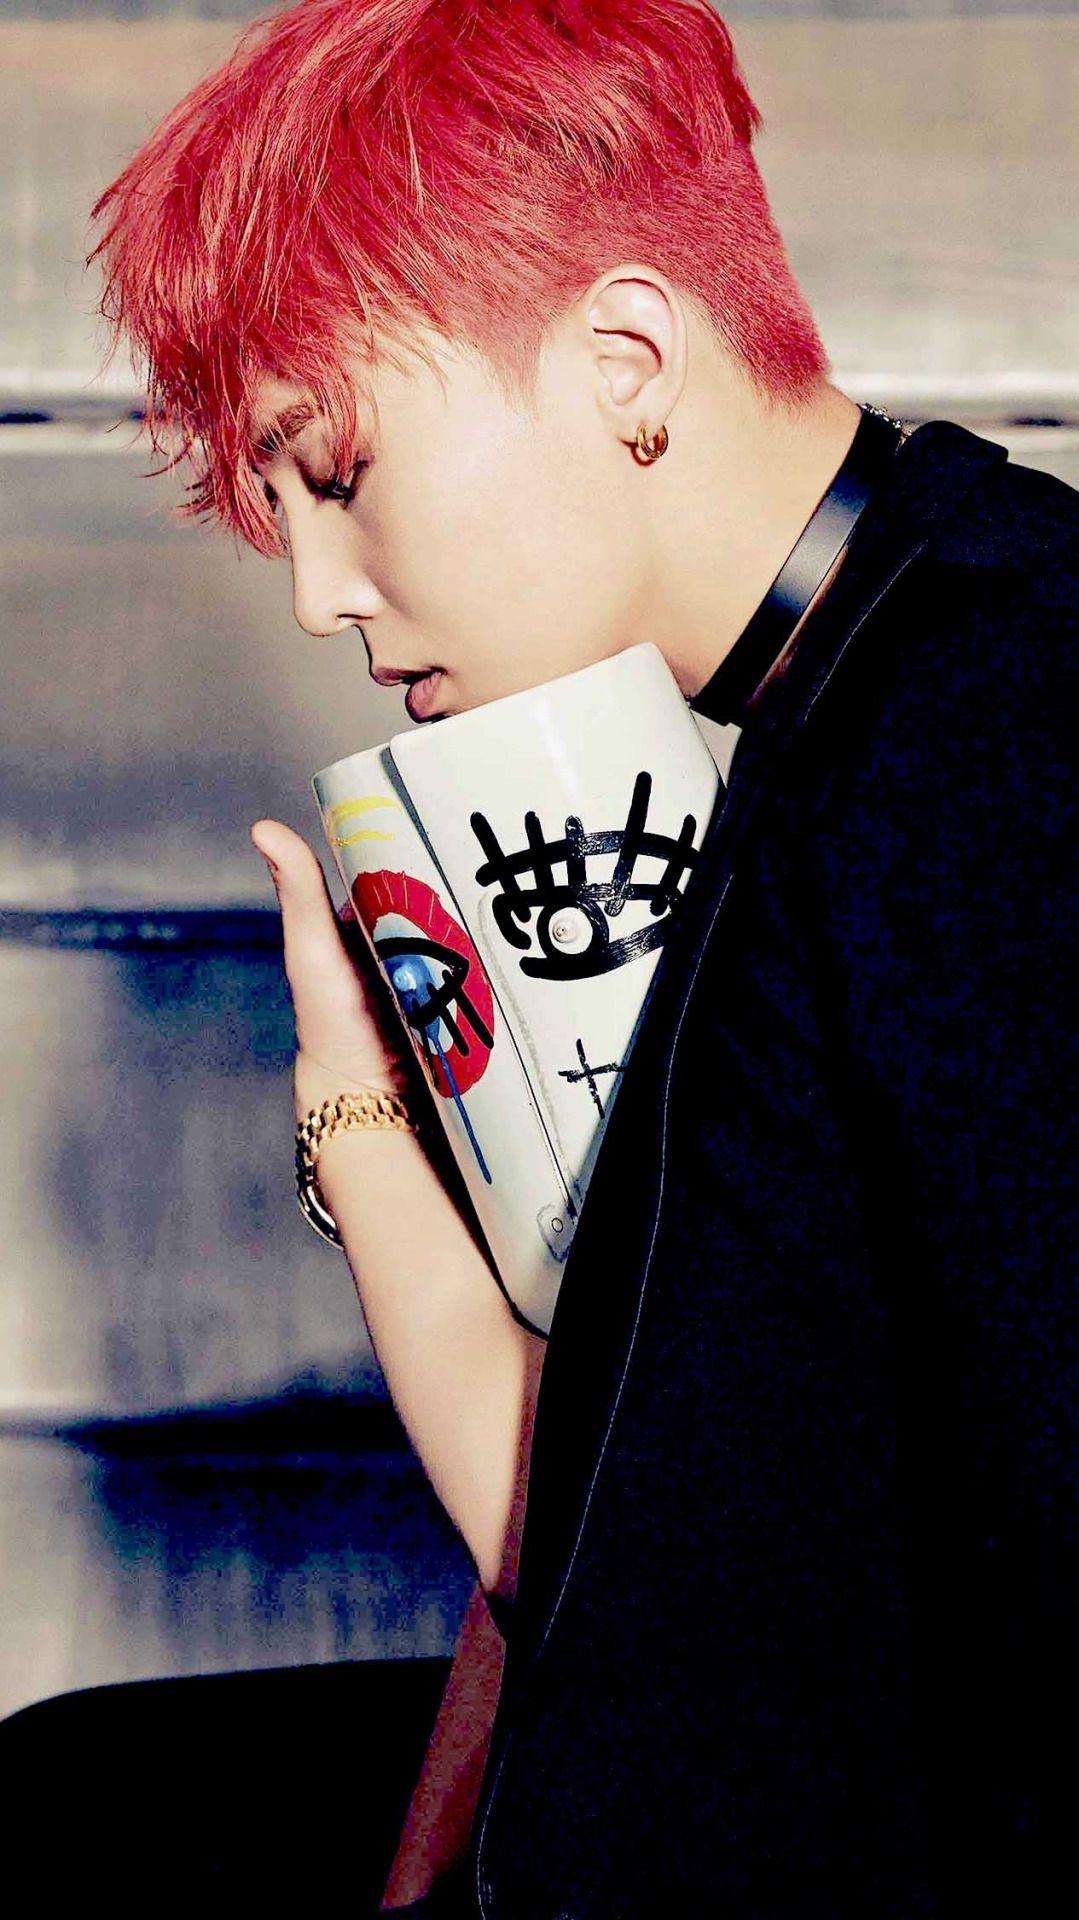 G Dragon Wallpapers  Top 20 Best G Dragon Wallpapers  HQ 